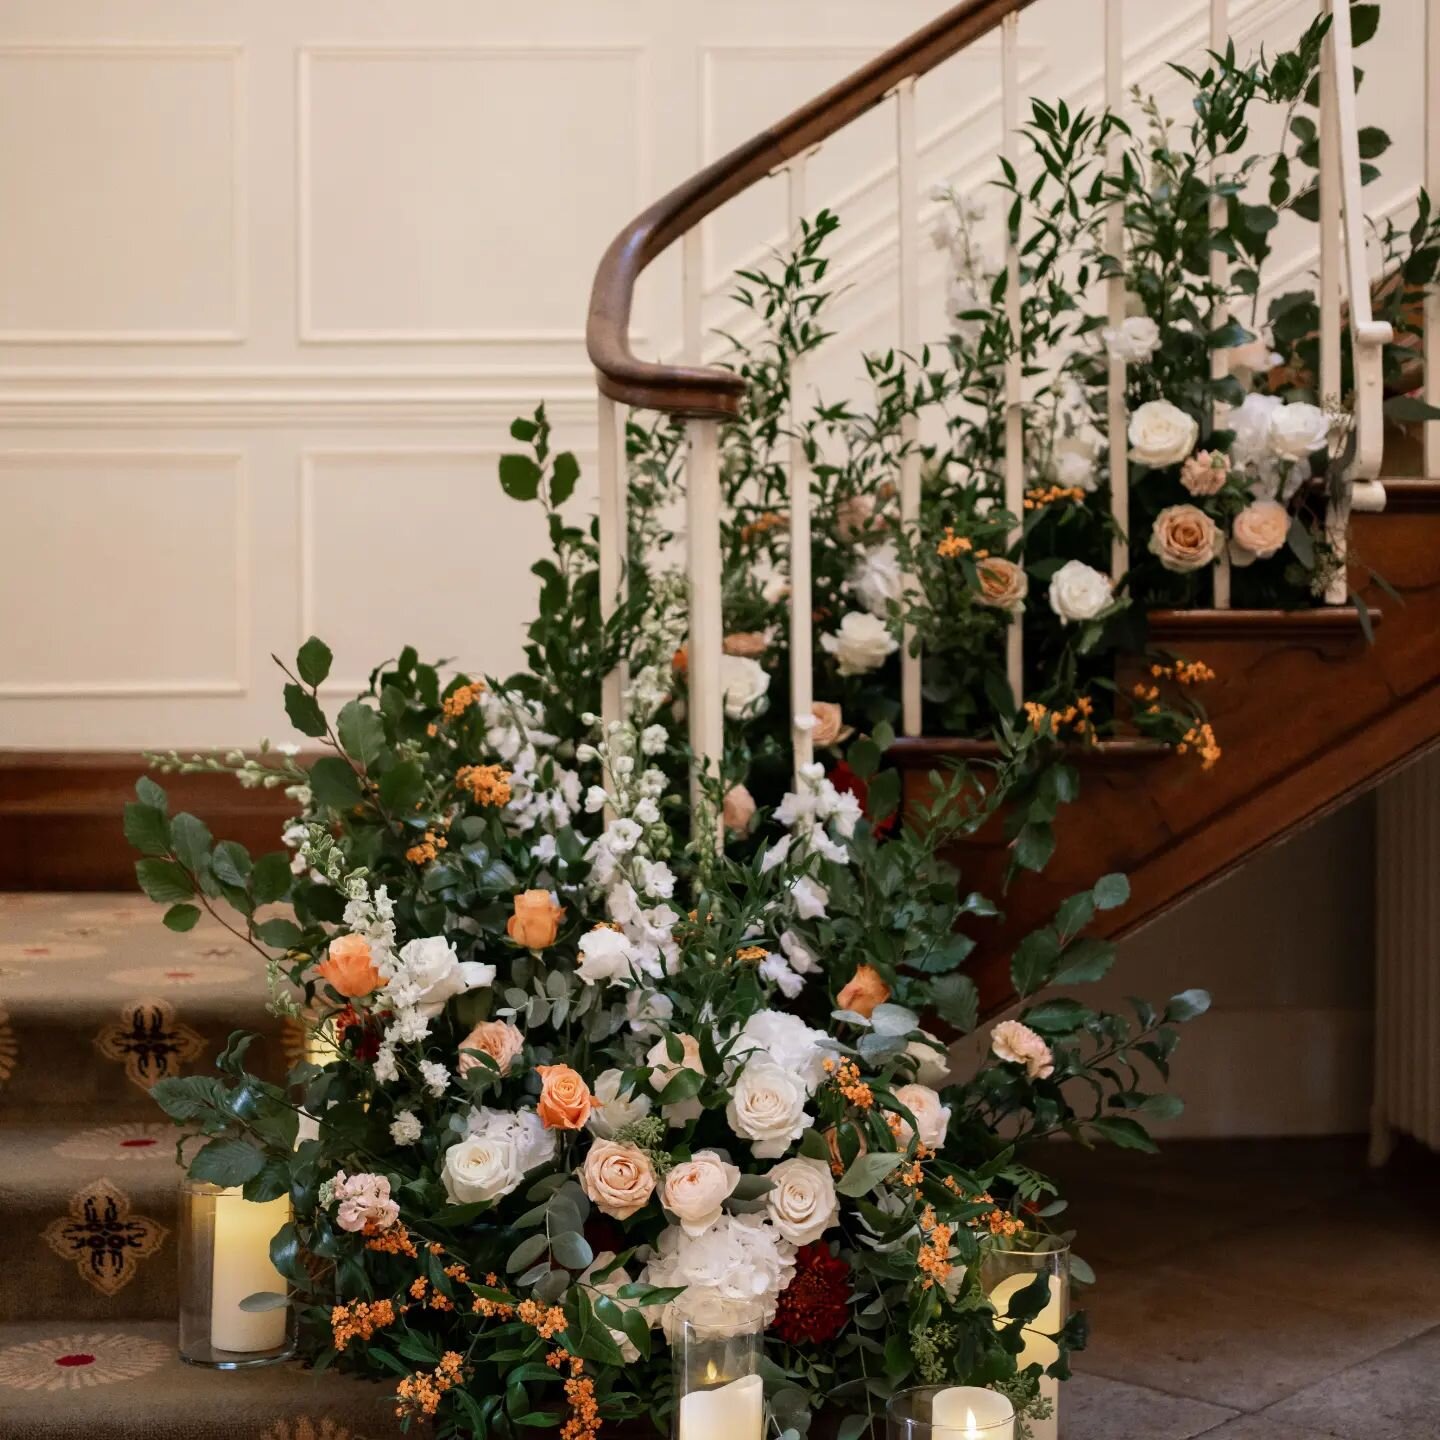 Getting married at a venue with a statement staircase? Why not make it even more of a statement by adding an abundance of flowers! The perfect way to welcome your guests to your wedding and also great for couple shots. 🌸🌿

Photo @amilouisaphotograp